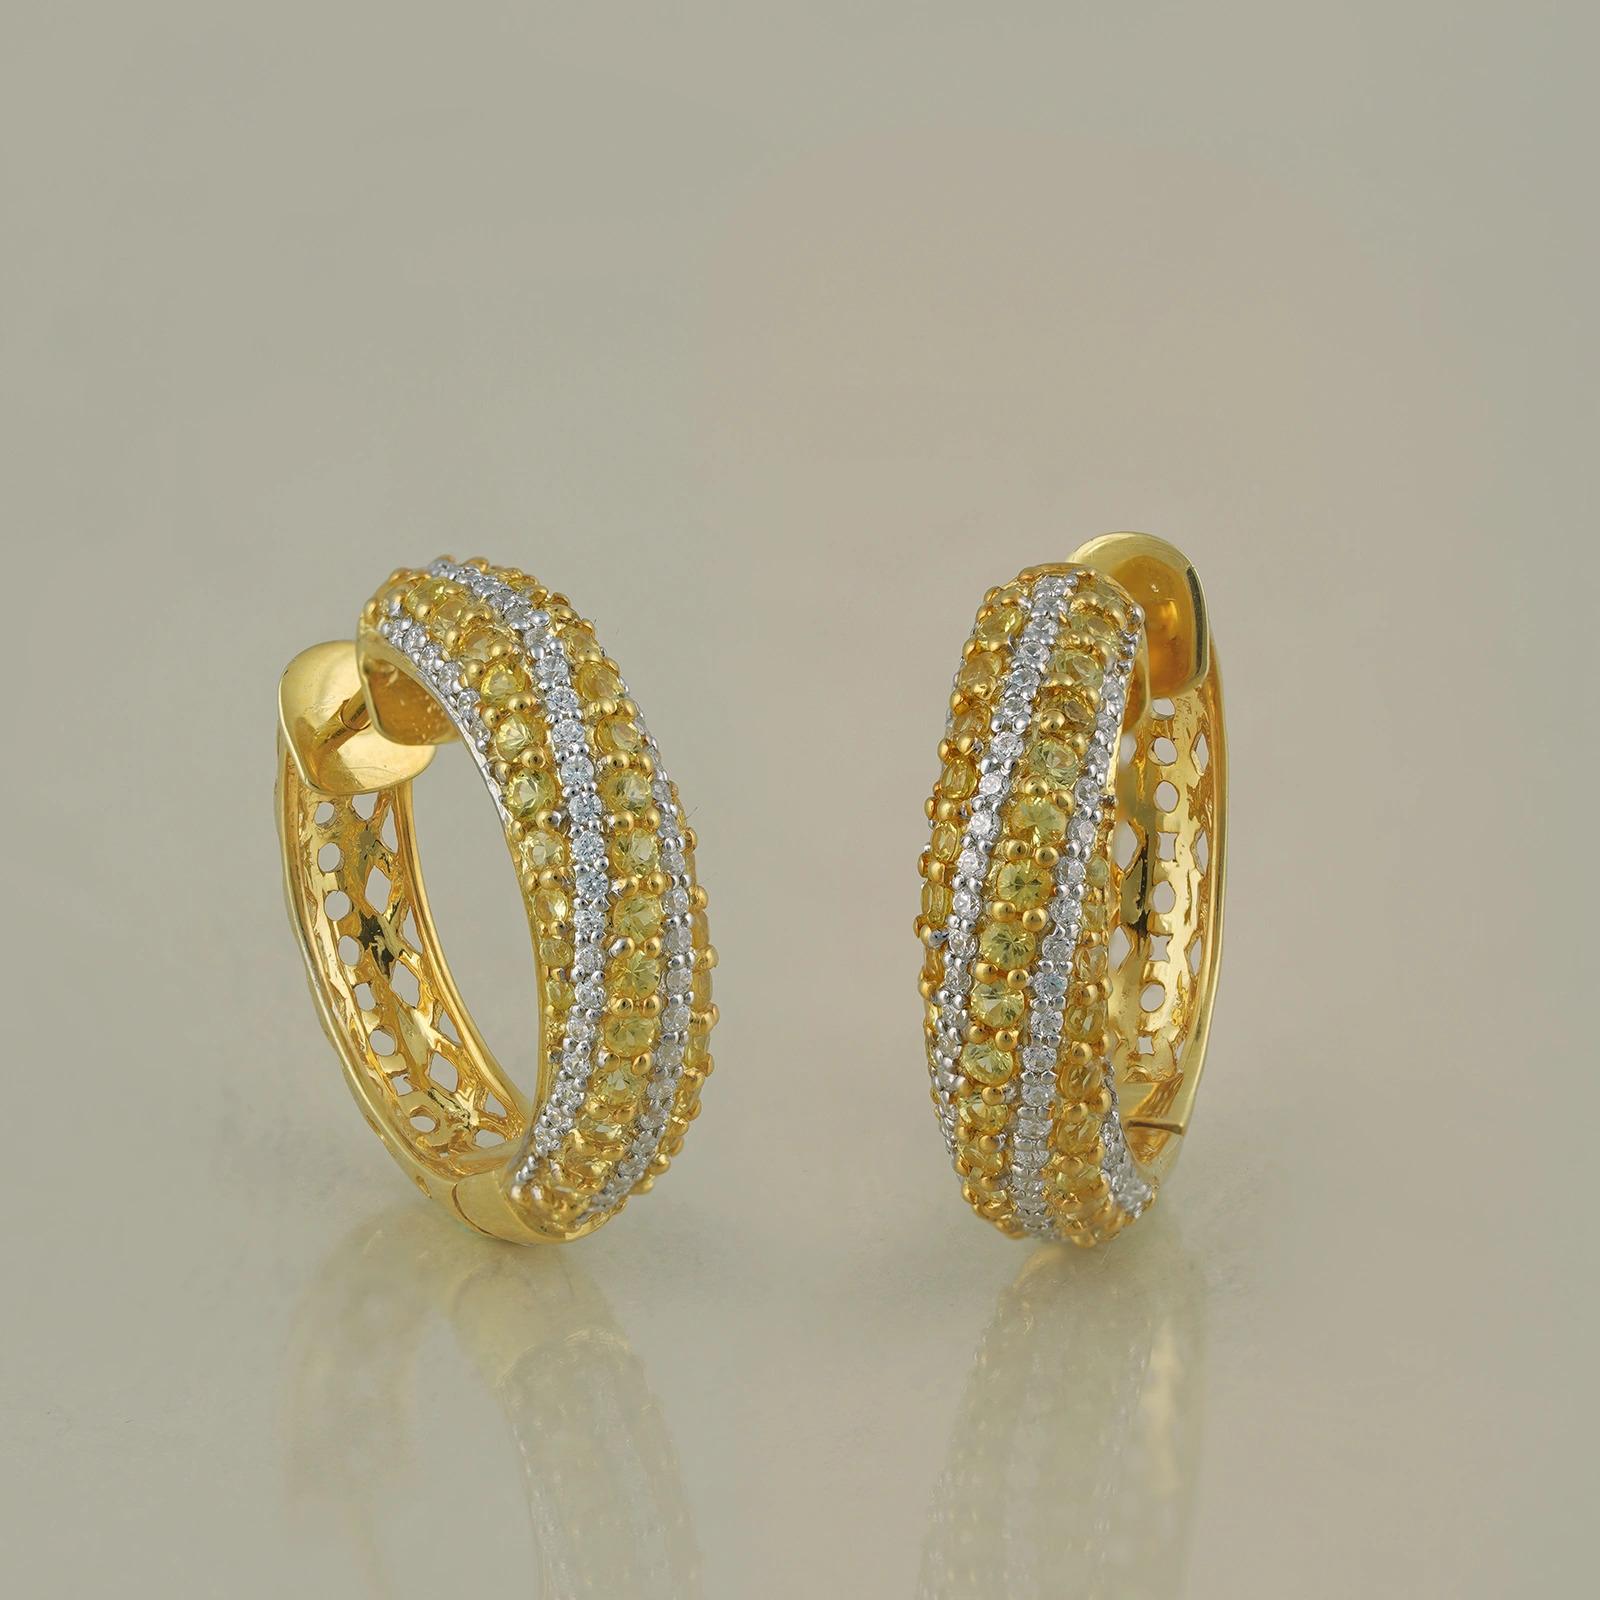 Gold(14K) : 8.50g
Diamonds : (VS clarity & H-I colour) : (Brilliant cut ) : 0.62ct
Gemstone : Yellow Sapphire : 2.31ct

Yellow sapphires. Diamonds. Made in yellow gold.
<br />
<br />
Dainty and exquisite, these mini hoops are a perfect balance of